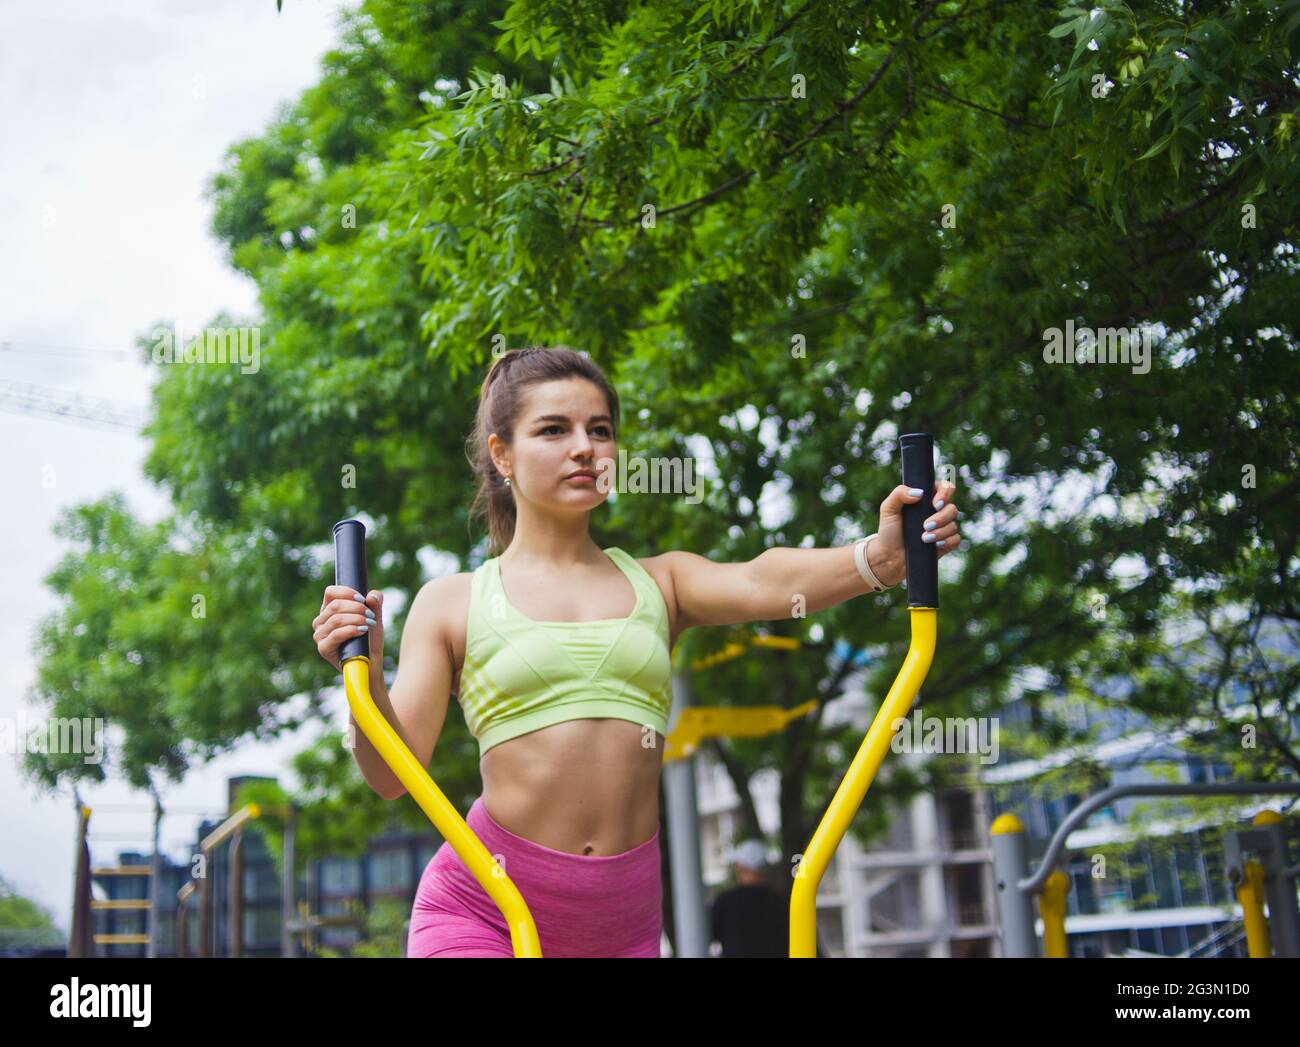 Attractive athletic woman doing exercises on exercise machines on the sports ground outdoors Stock Photo